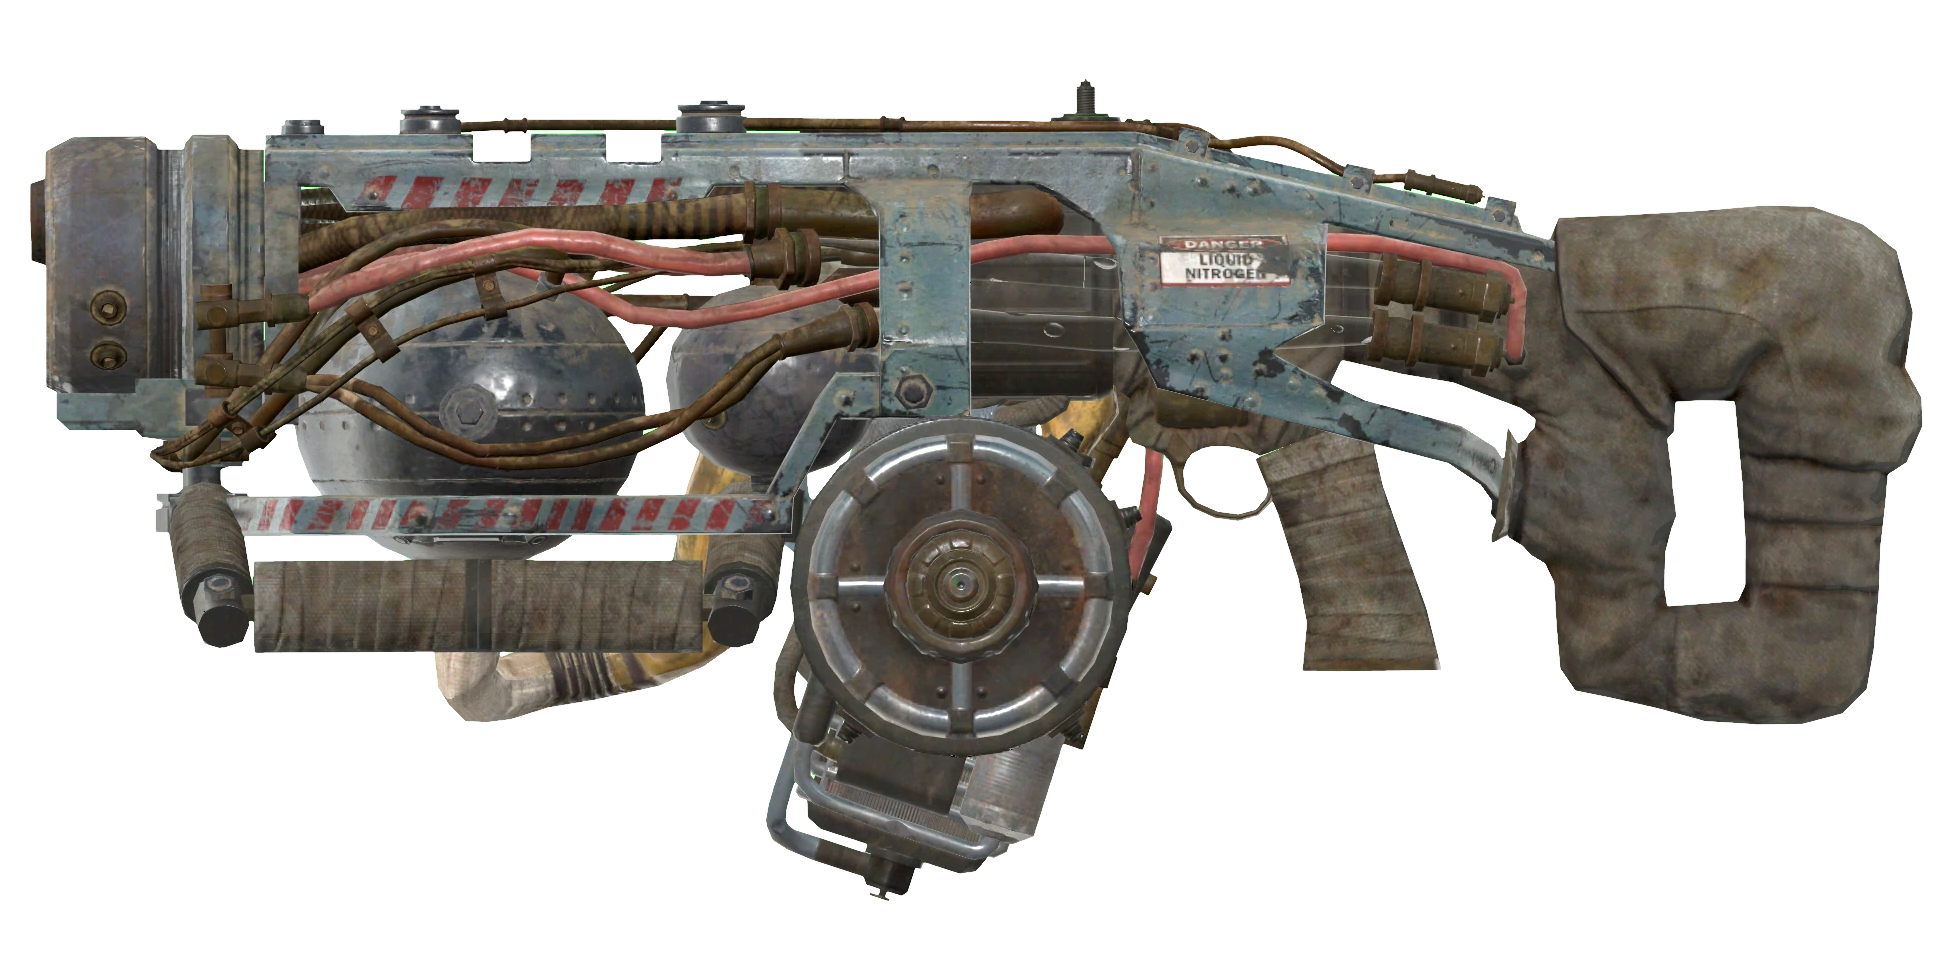 Fallout 4 fallout 76 weapons фото 9